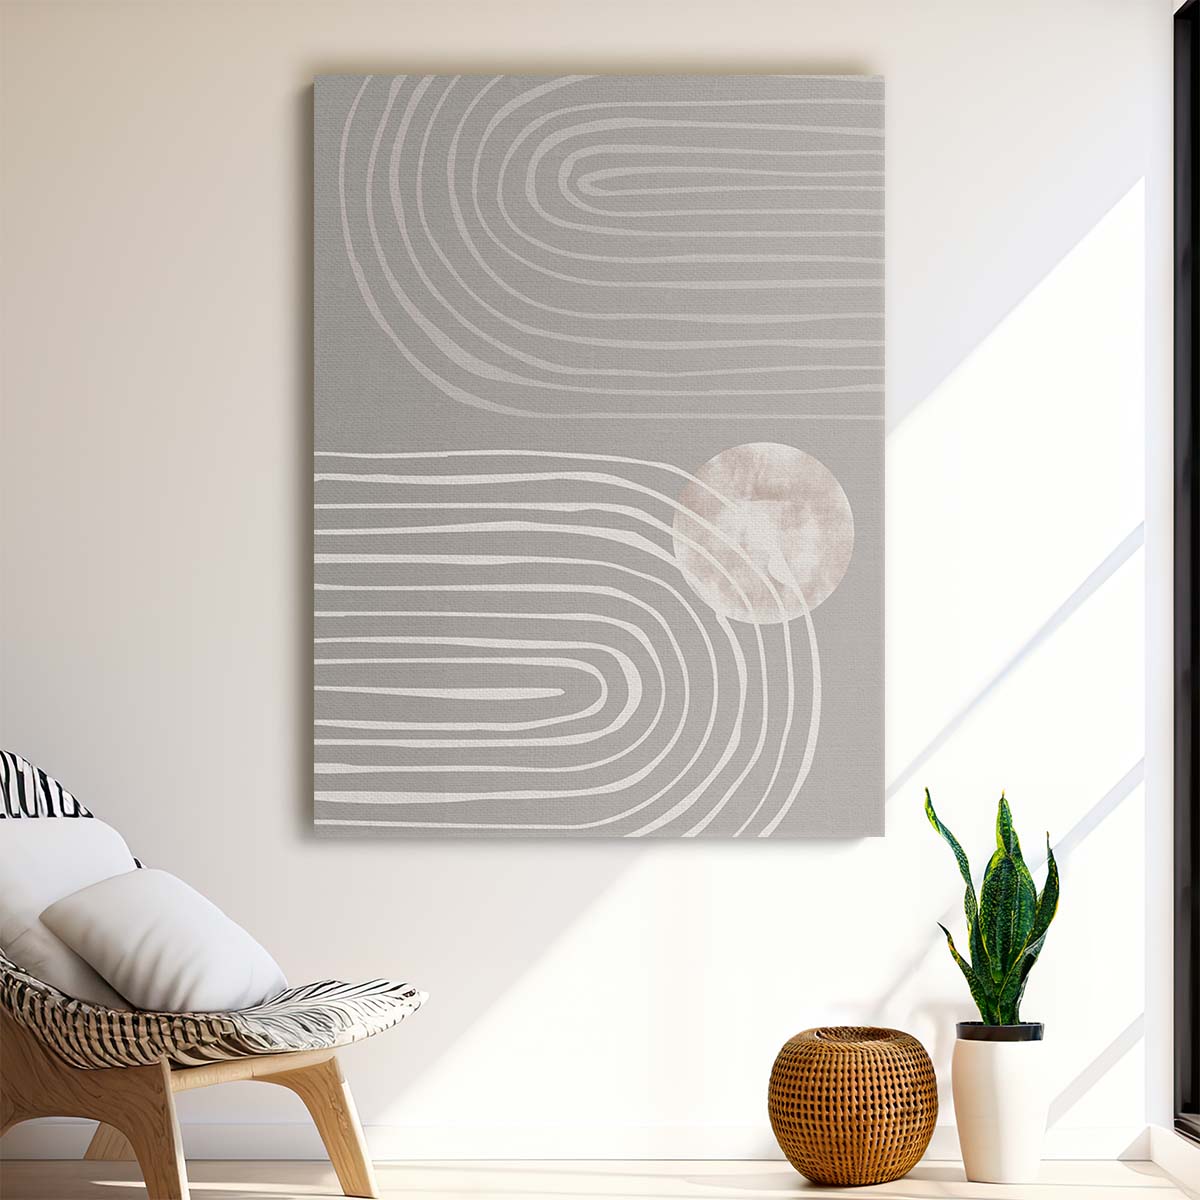 Illustrated Abstract Geometric Arch Artwork - Beige Circular Shapes by Luxuriance Designs, made in USA